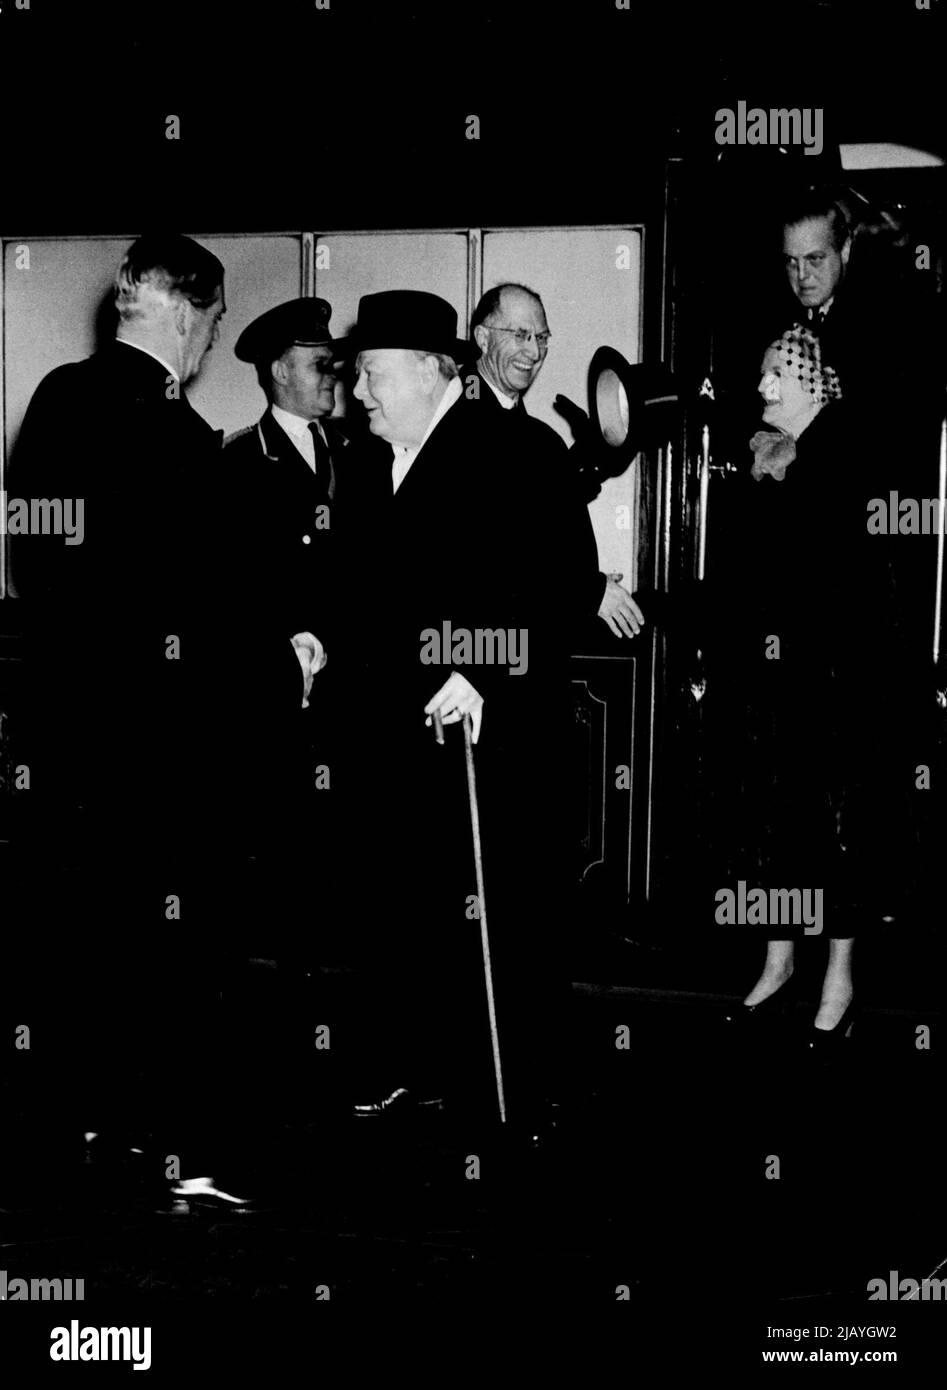 Mr. Churchill Returns From U.S.A.: Mr. Winston Churchill being greeted on arrival at Waterloo Station by Mr. Anthony Eden, Foreign Secretary, today. Also in the picture are Mrs. Churchill and (in the door) Mr. Randolph Churchill, the Premier's son. Mr. Churchill will be confronted by many problems on returning to his desk - not the least of which is the situation in the middle east. January 28, 1952. (Photo by Paul Popper, Paul Popper Ltd.). Stock Photo